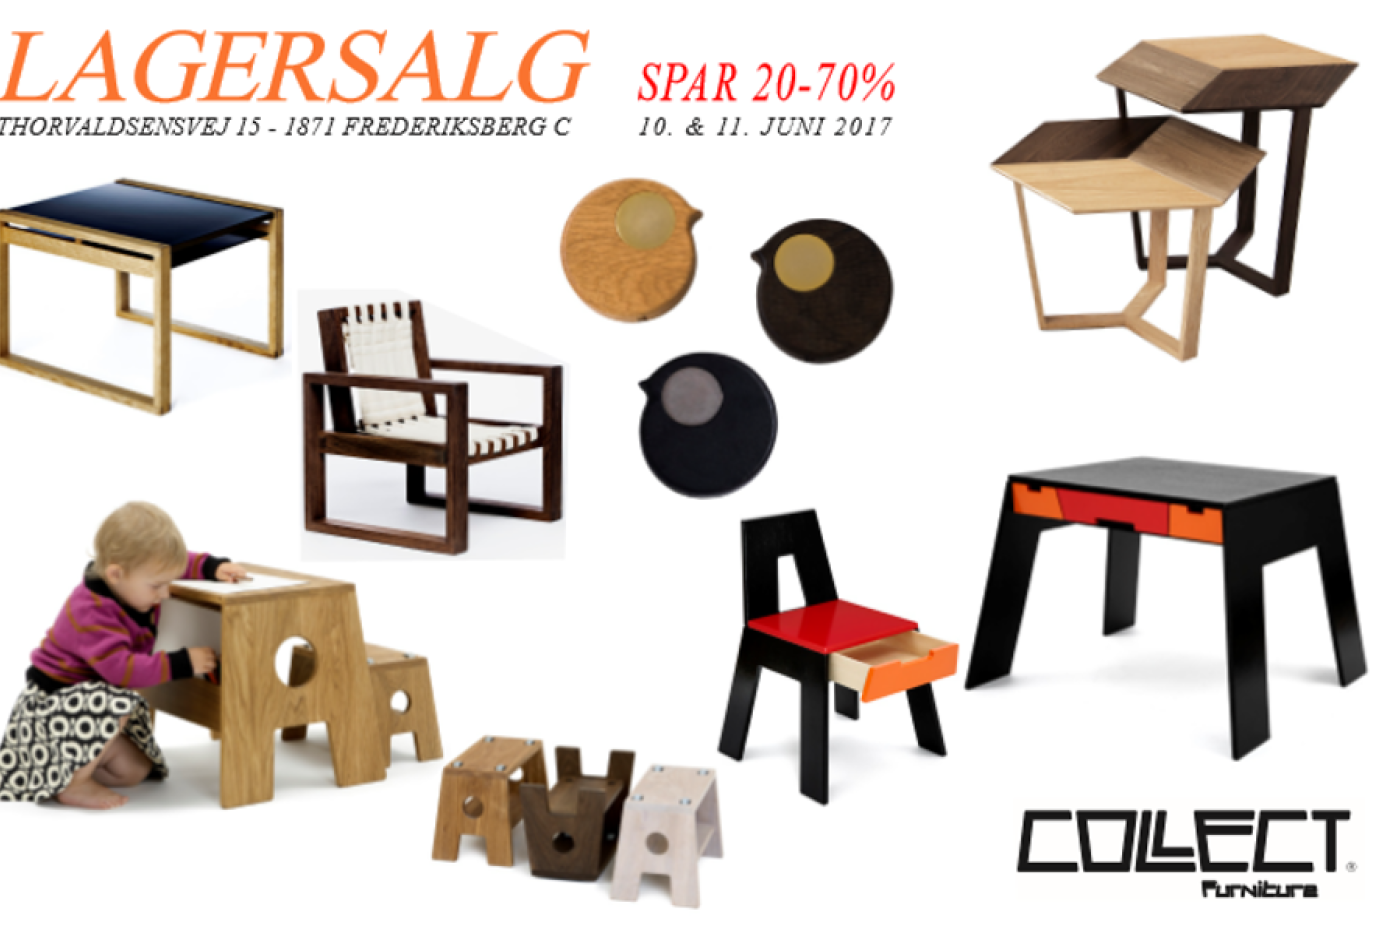 Collect Furniture lagersalg